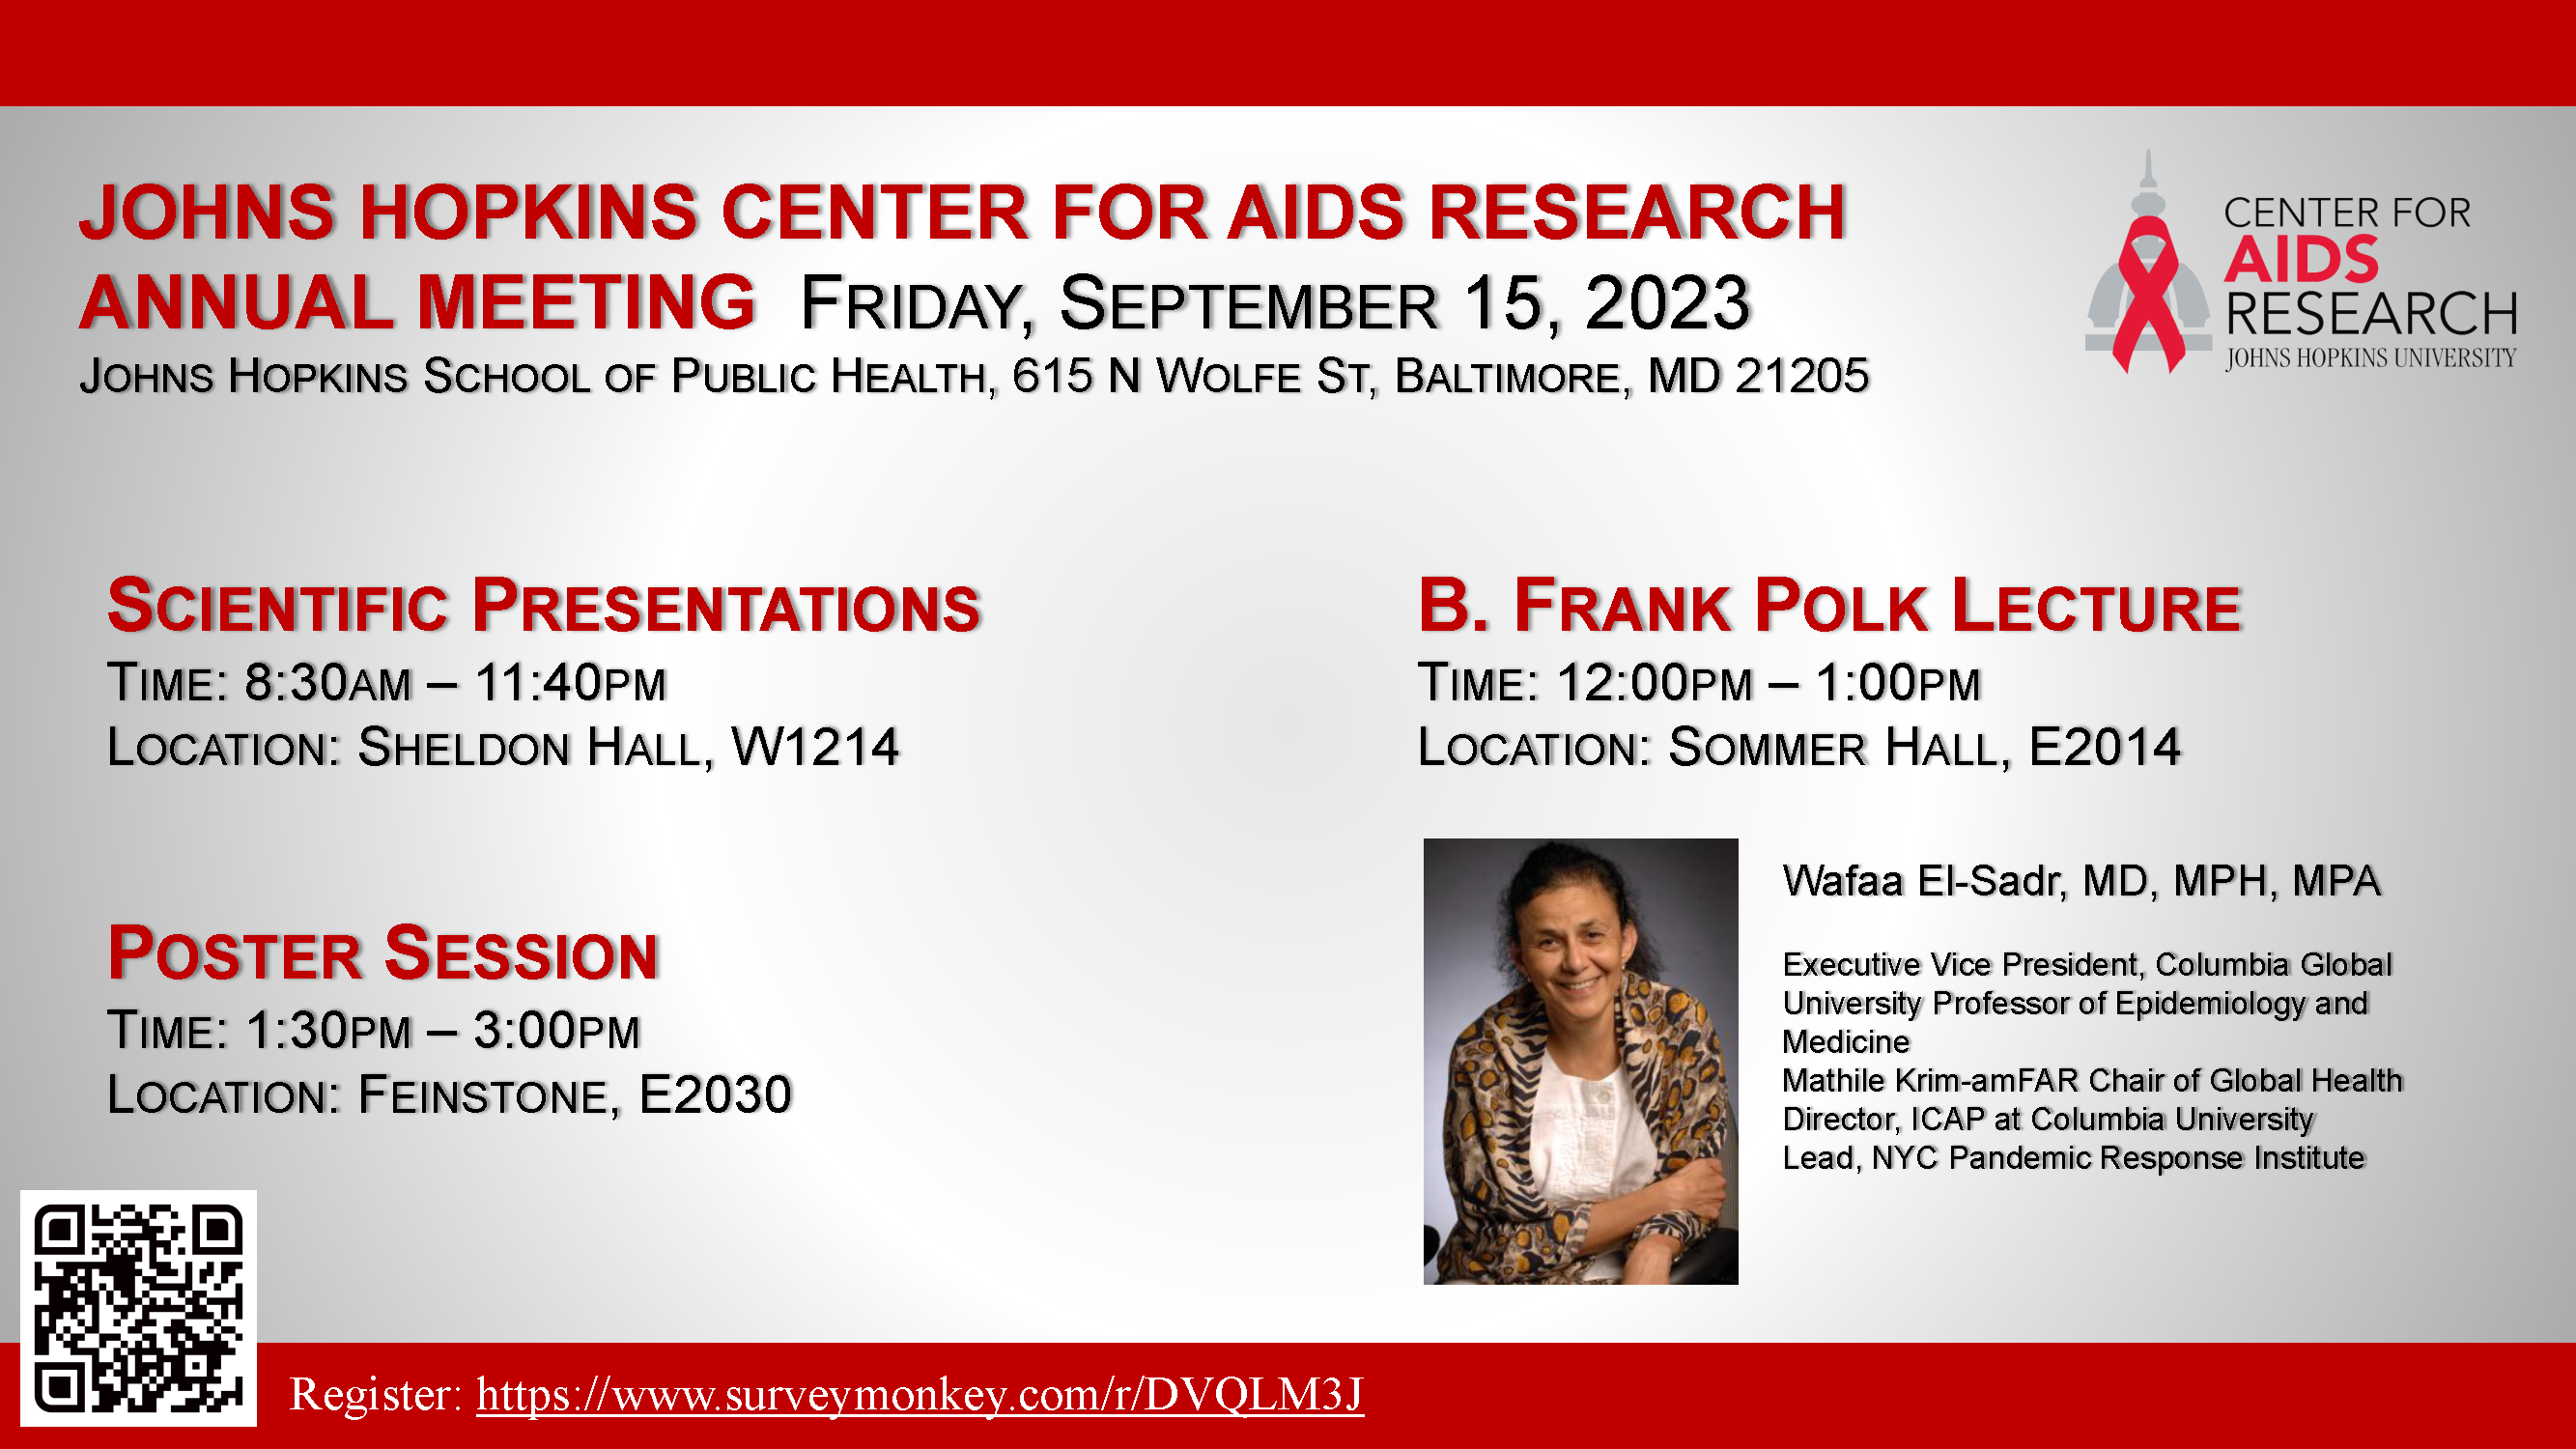 Center for AIDS Research Annual Meeting September 15